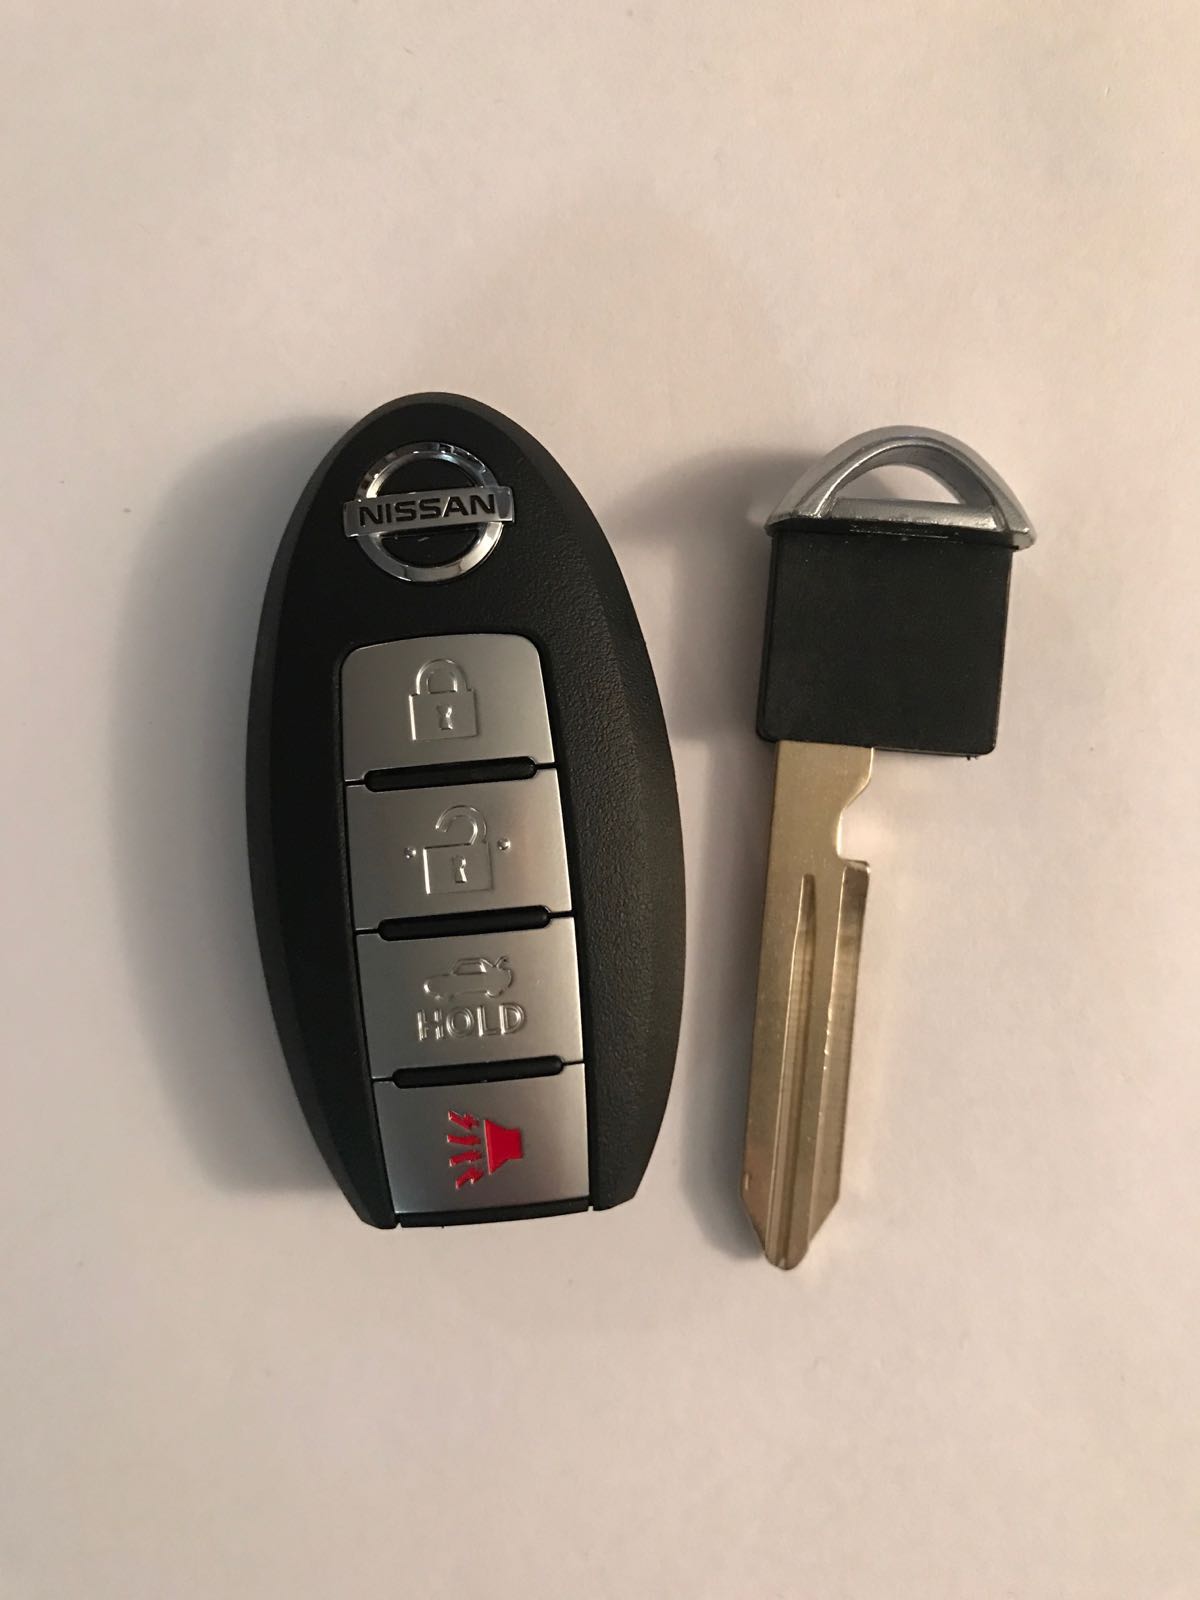 Nissan Sentra Replacement Keys What To Do, Options, Cost & More